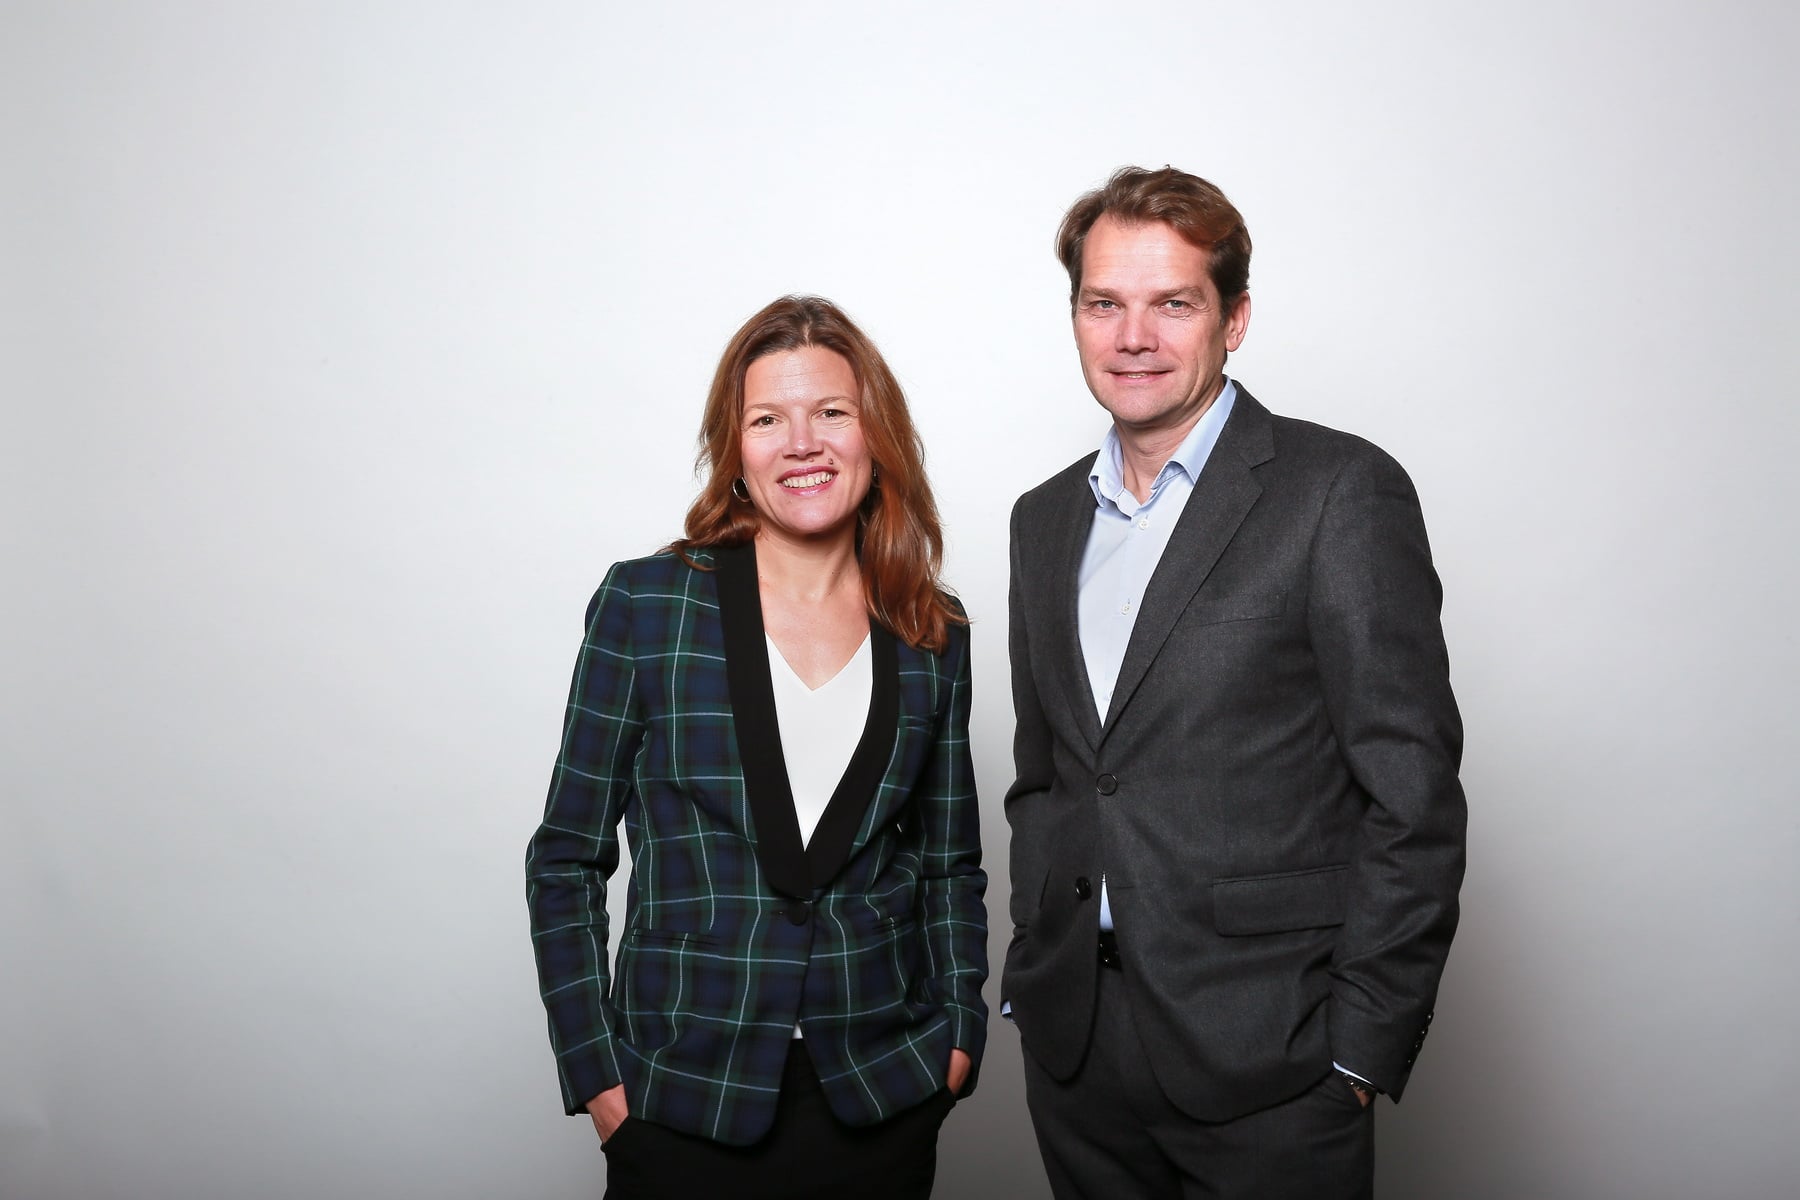 OPINION. By avoiding the hectic pace of life of startups while giving people responsibility, mid-sized companies often offer a healthy environment for their employees. Their advantage: a long-term vision that allows them to promote a positive societal impact. By Fanny Letier and François Rivolier, co-founders of GENEO Capital Entrepreneur.